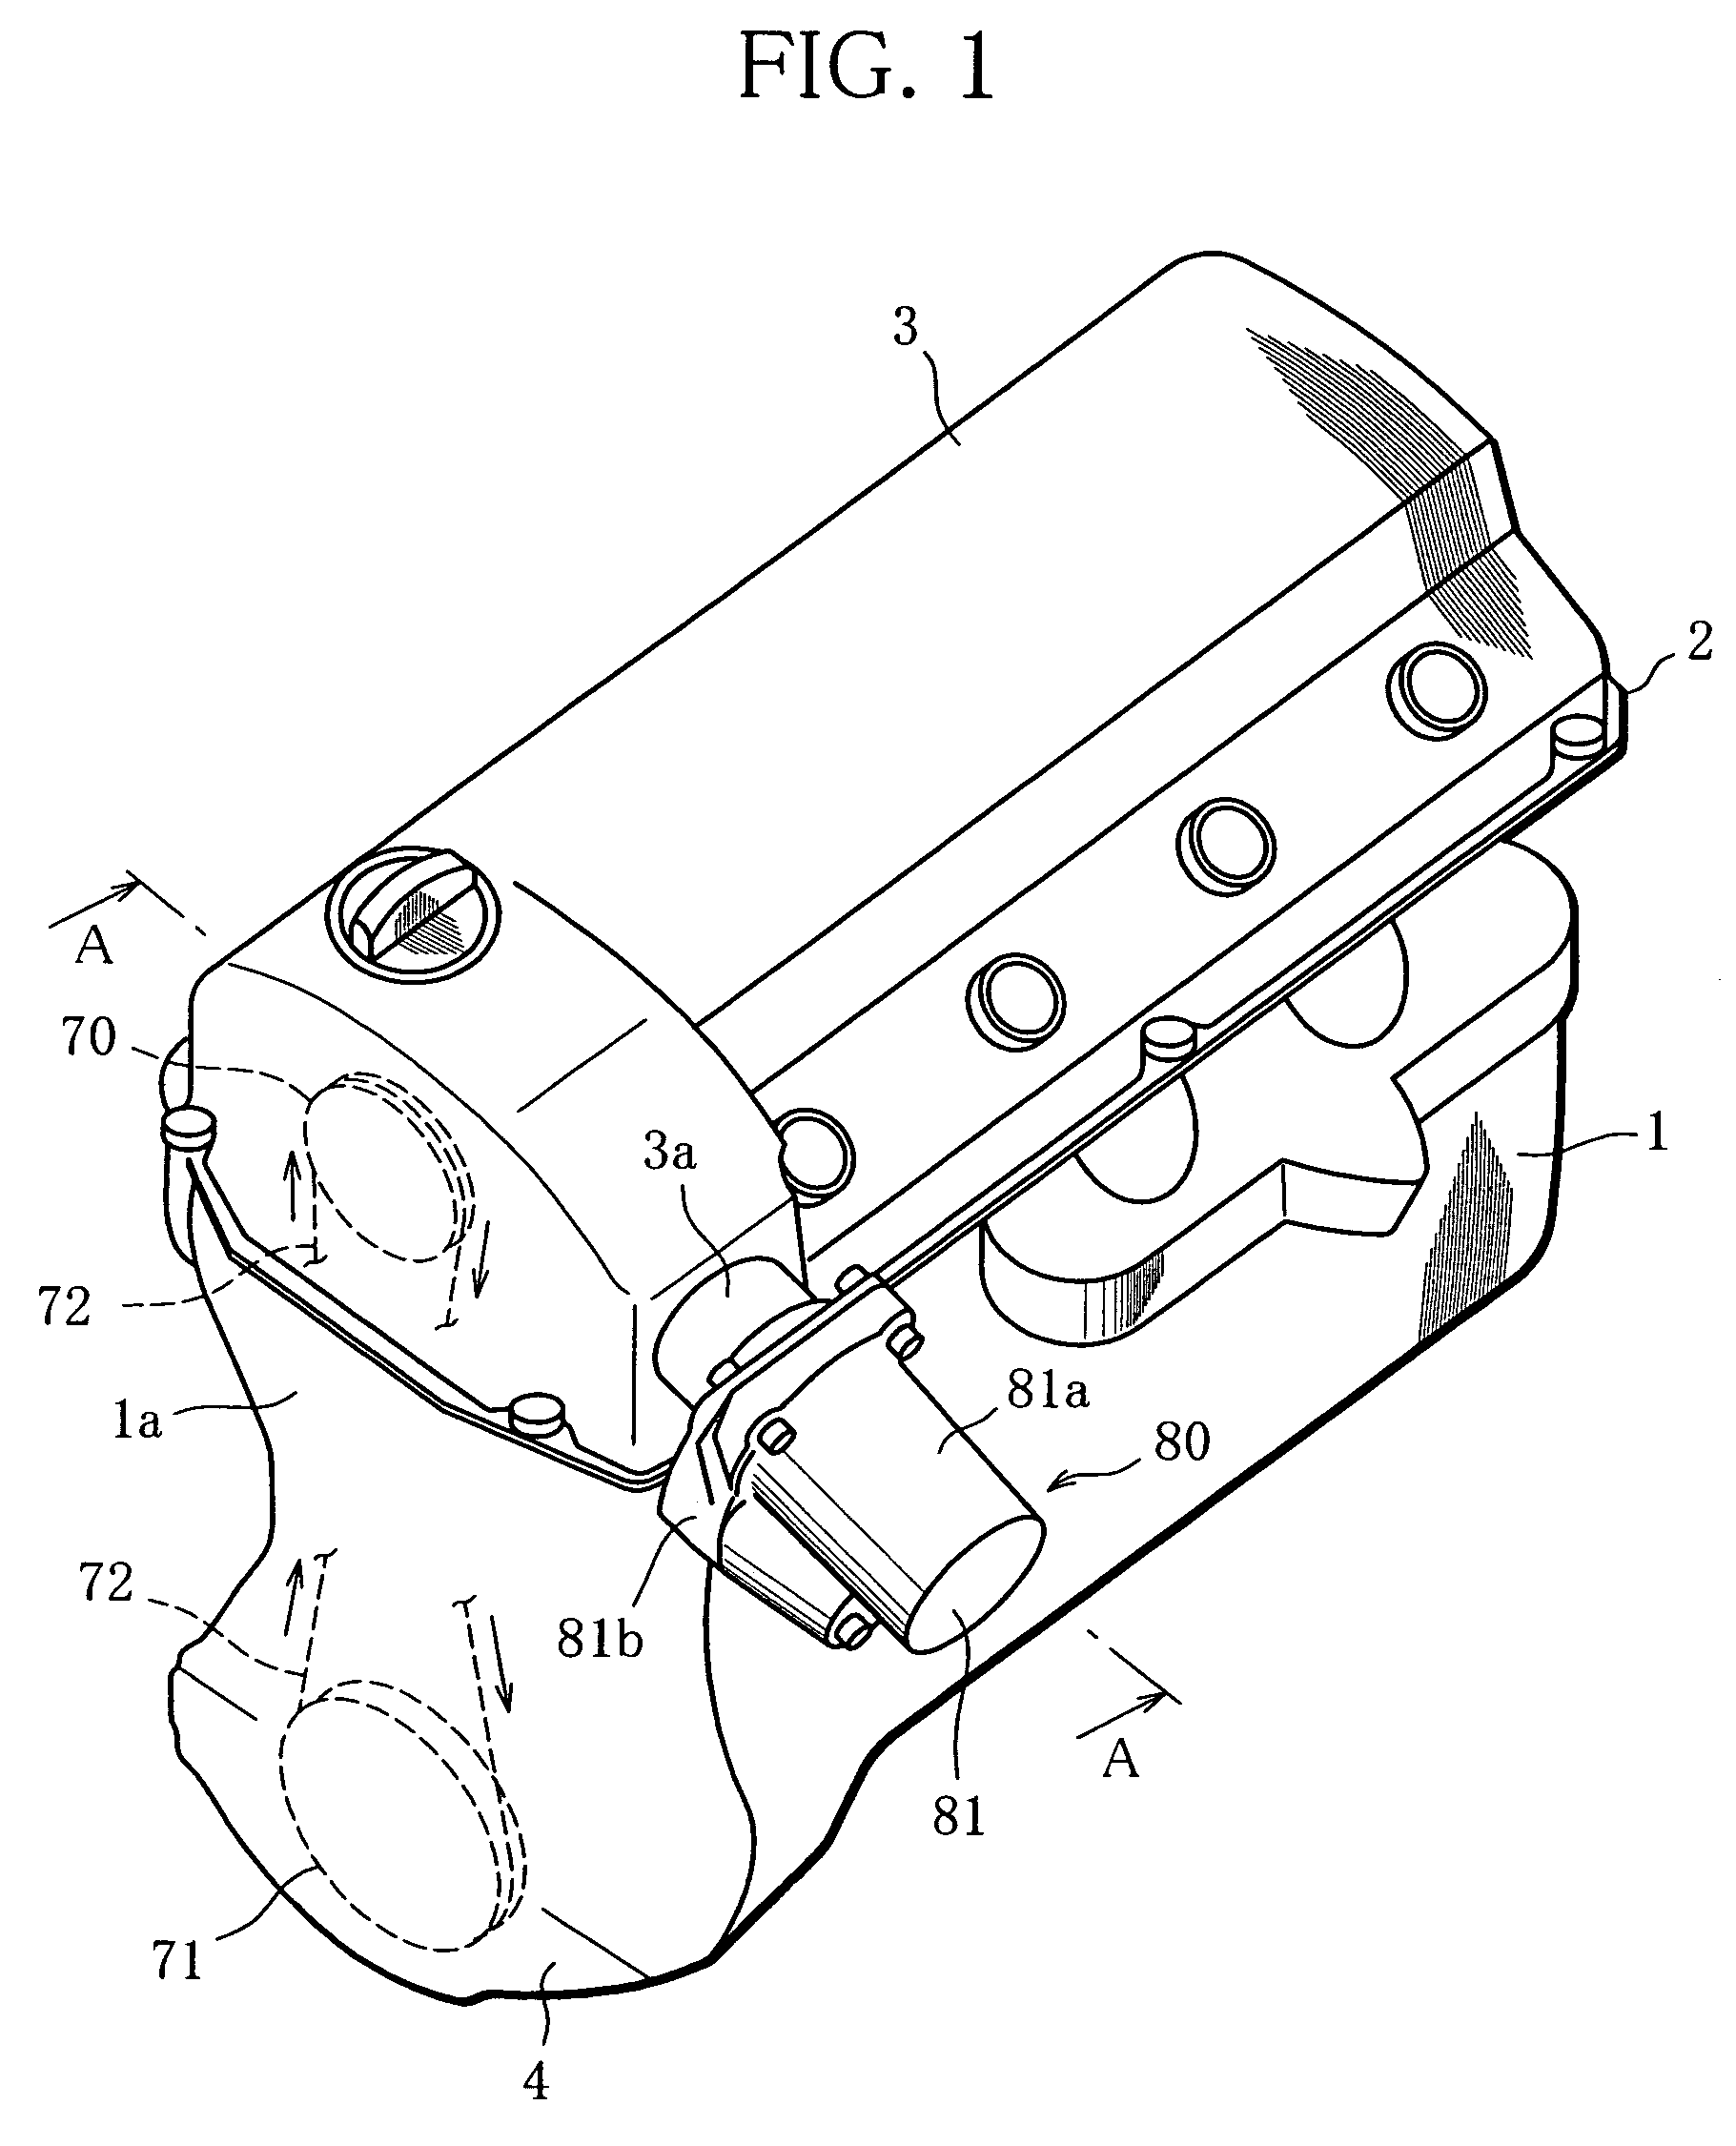 Variable valve train system for internal combustion engine